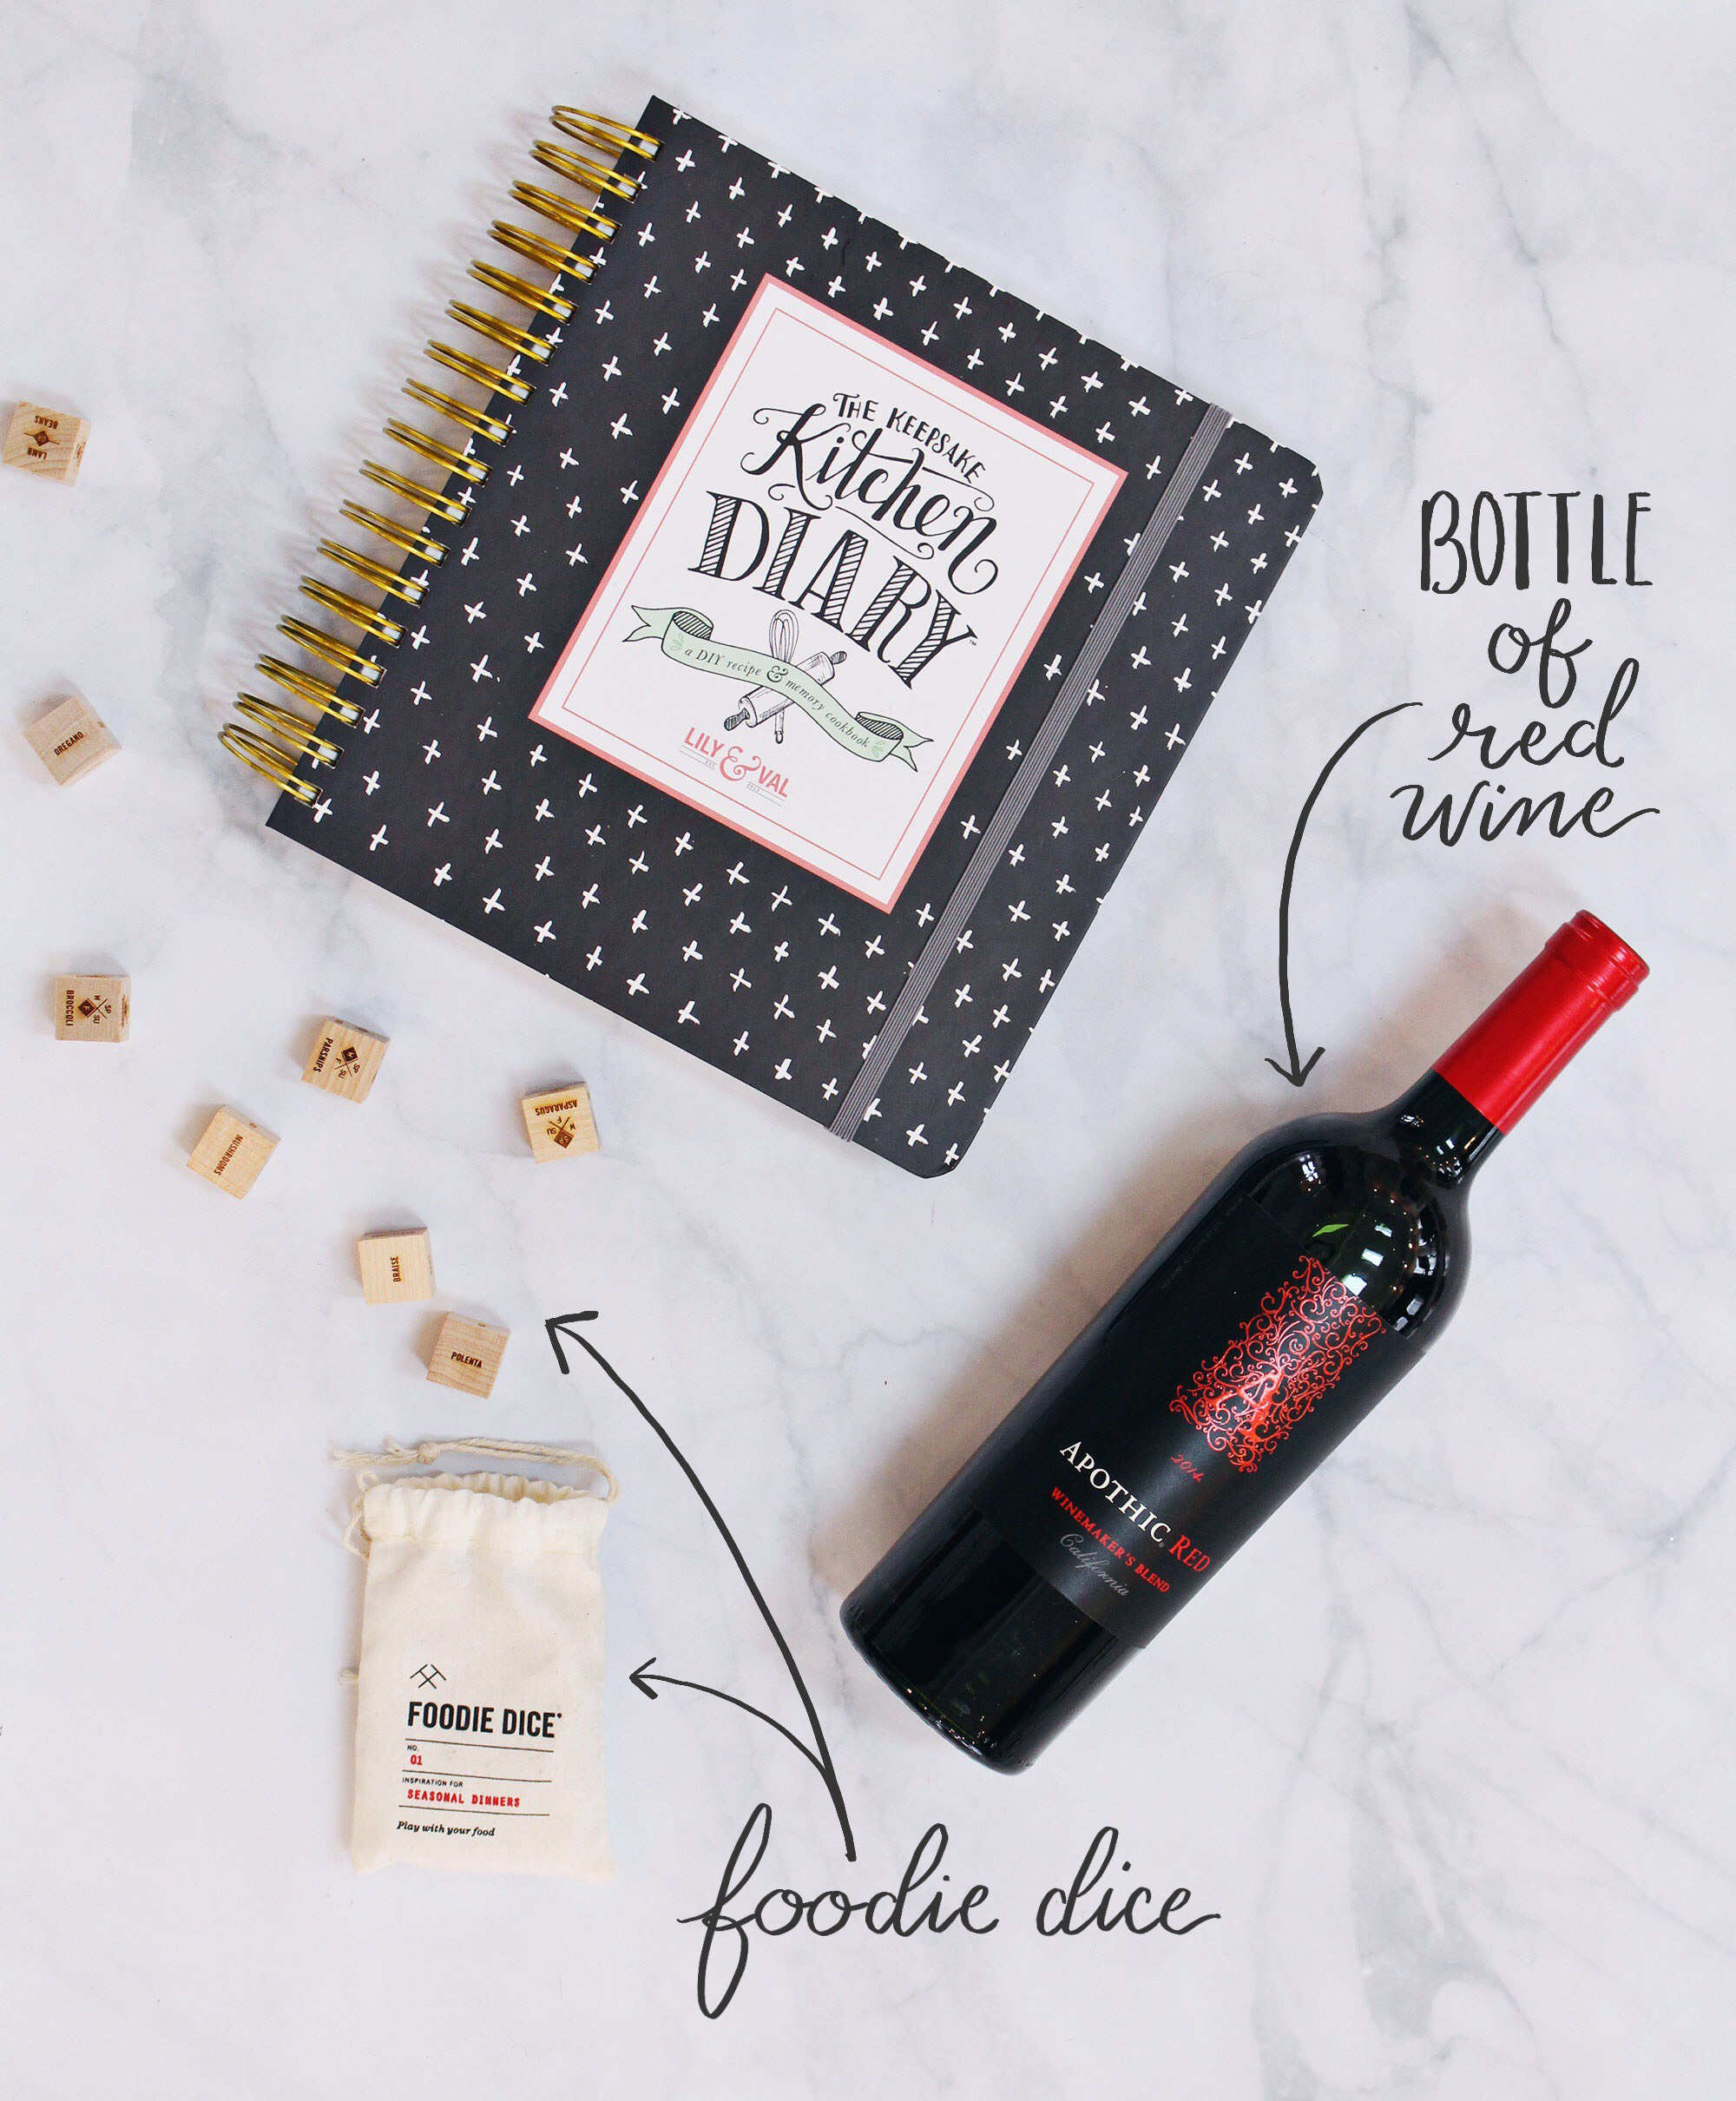 For the new couple, give them a gift of a night in. Using Foodie Dice & The Keepsake Kitchen Diary, they can create new recipes and memories to last forever.